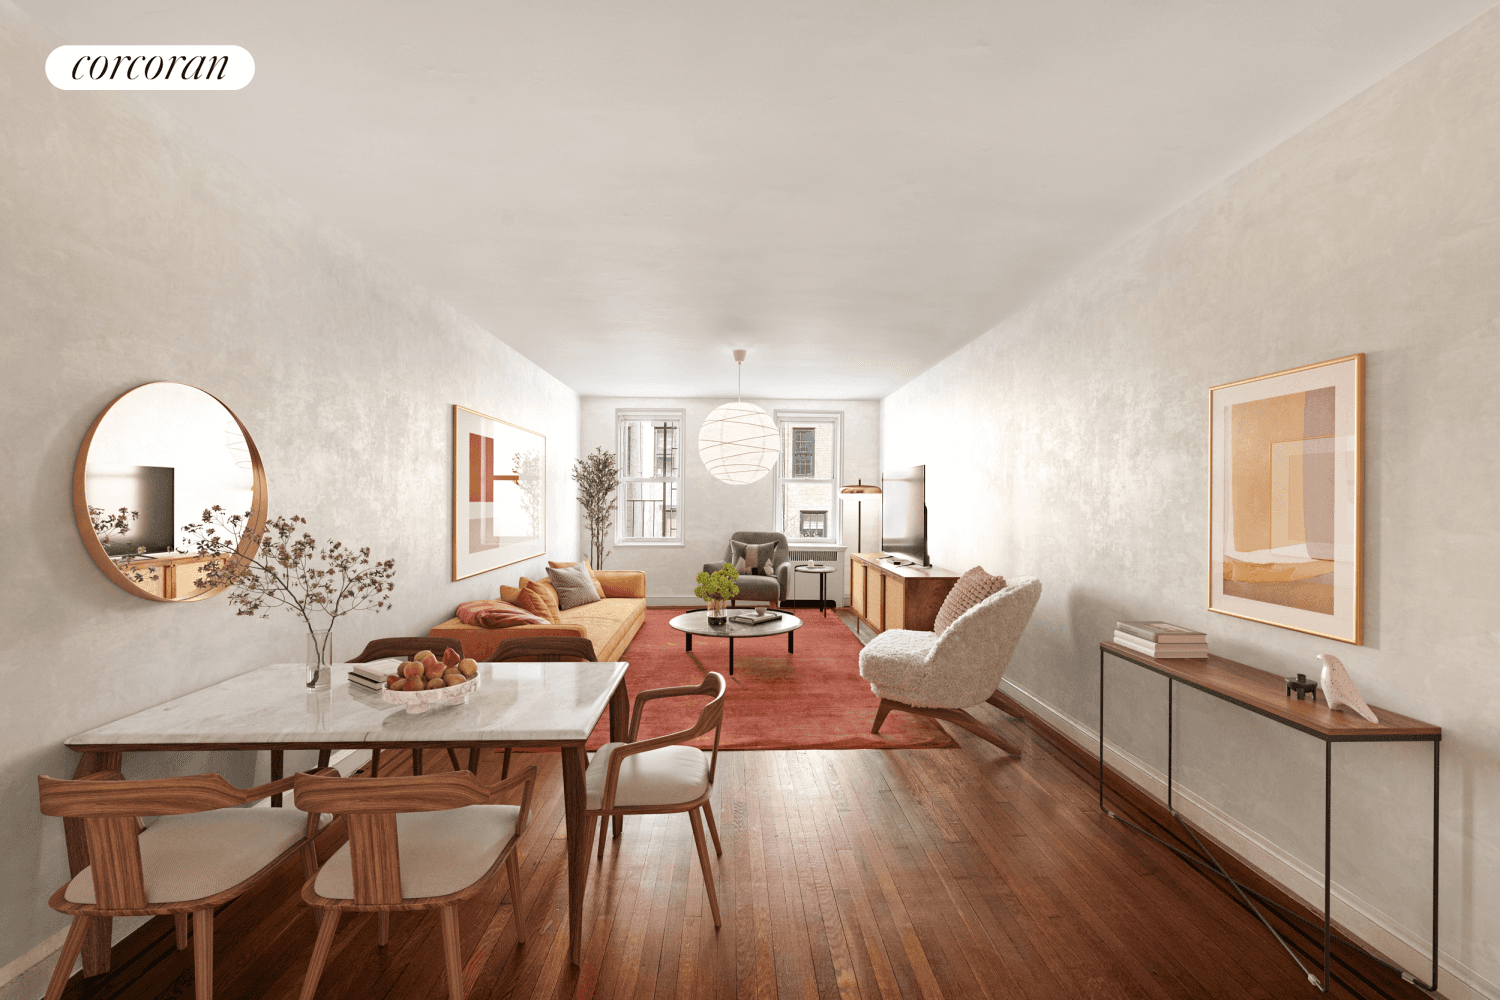 Bring Your ArchitectExperience the epitome of Manhattan living with this expansive two bedroom, two bathroomresidence, awaiting your creative vision and transformative renovation.